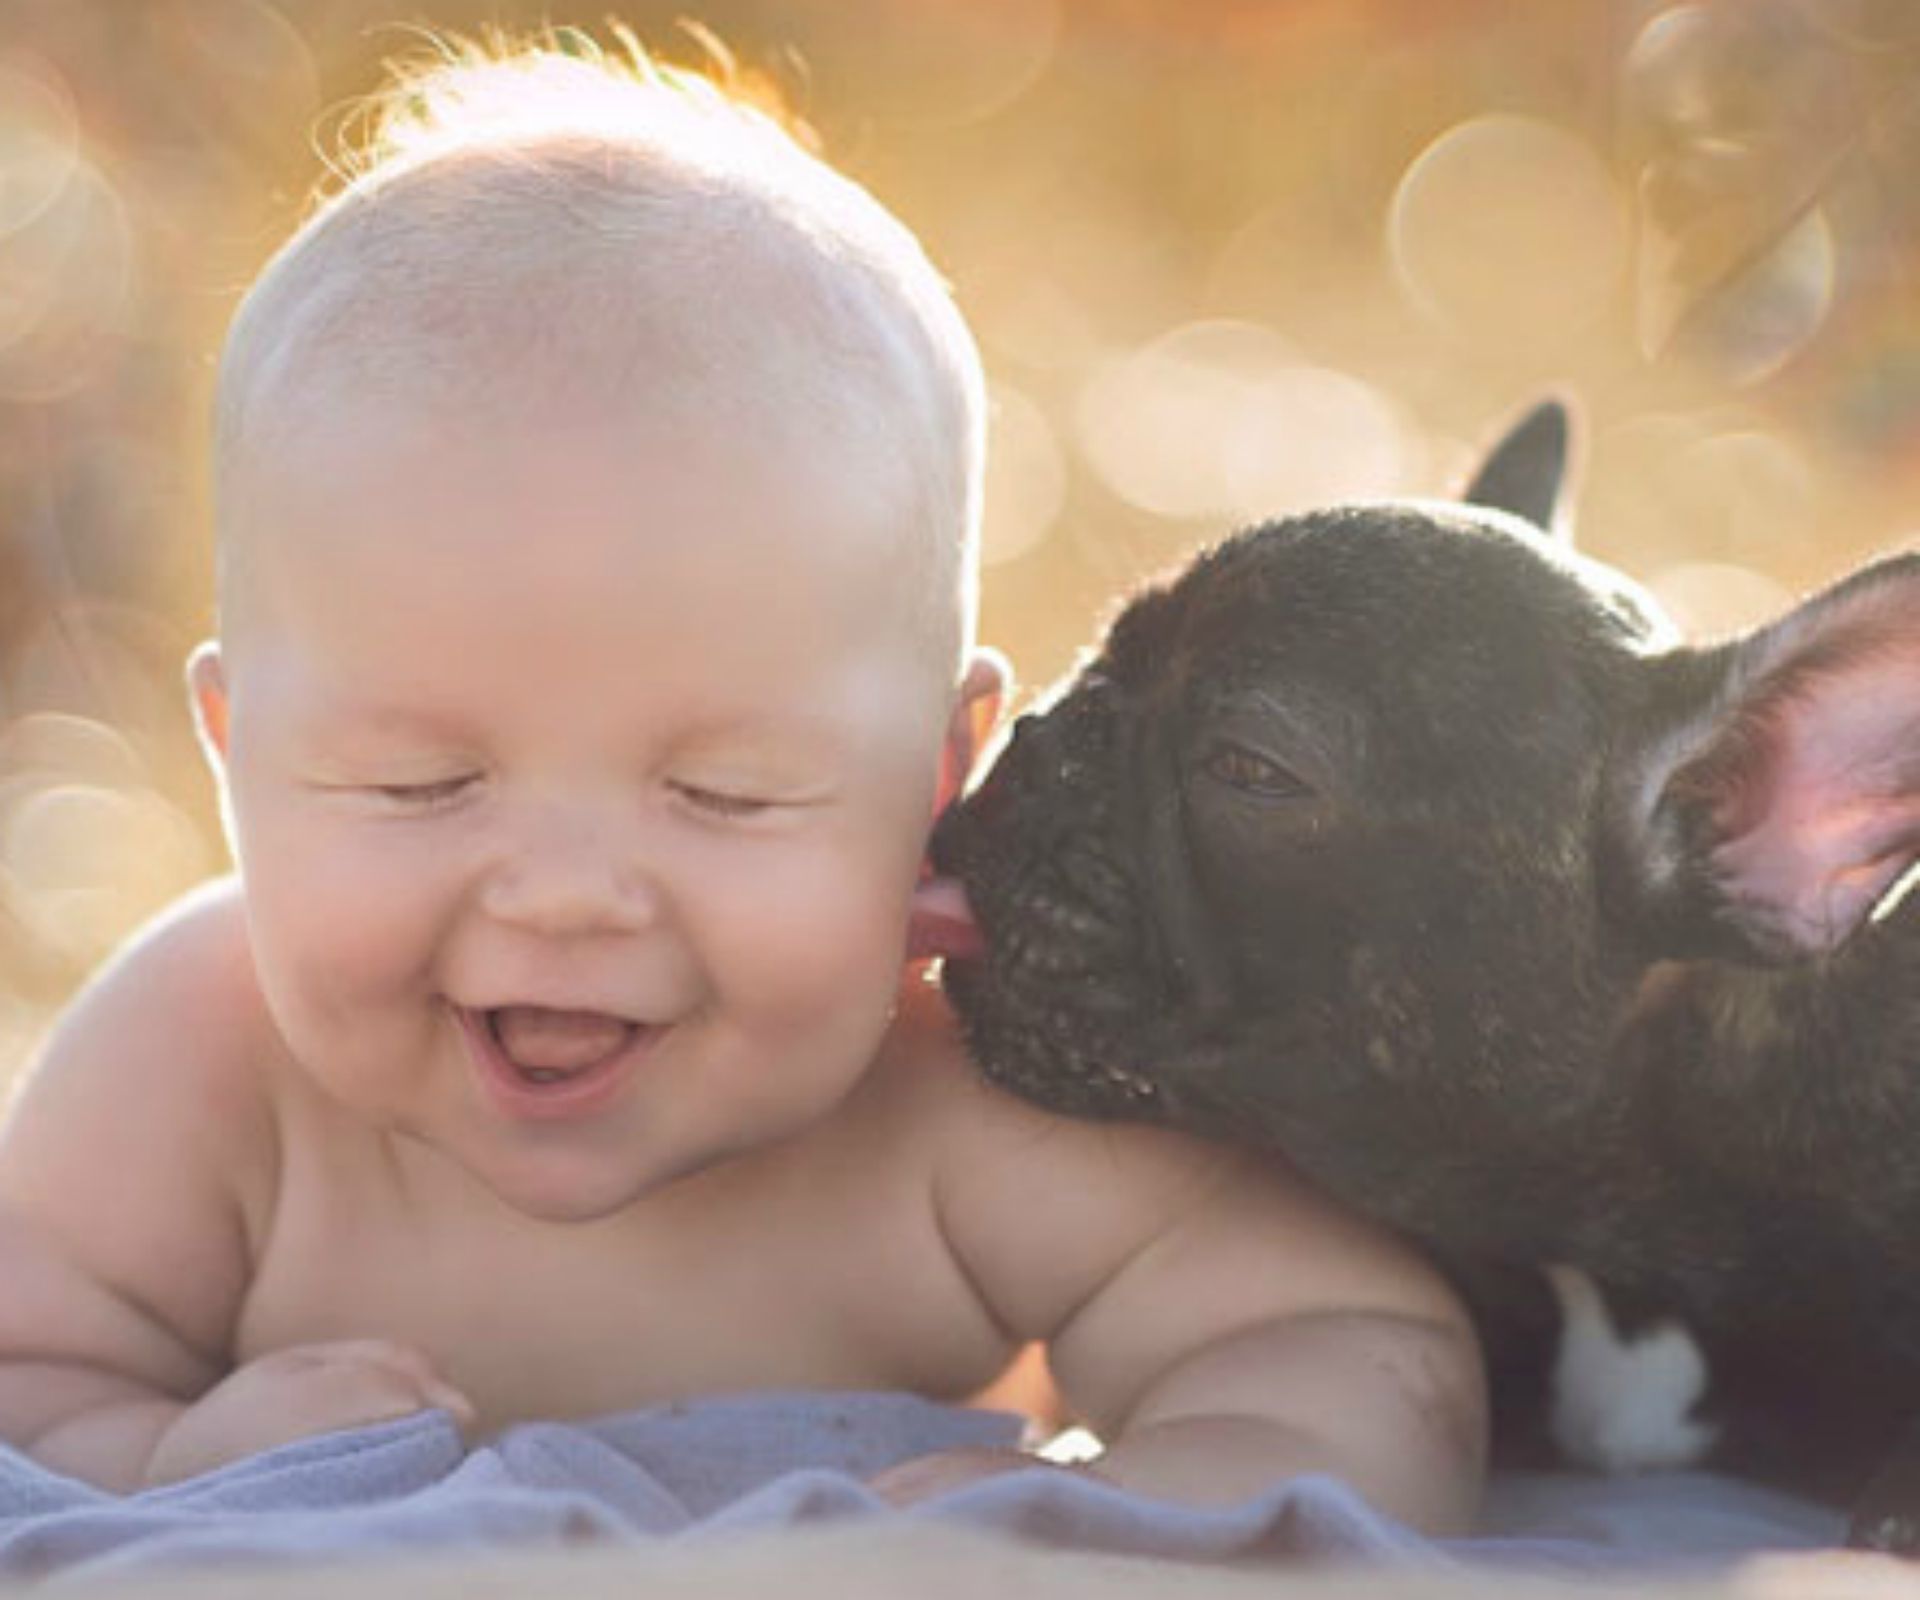 Baby and bulldog: Unlikely best friends